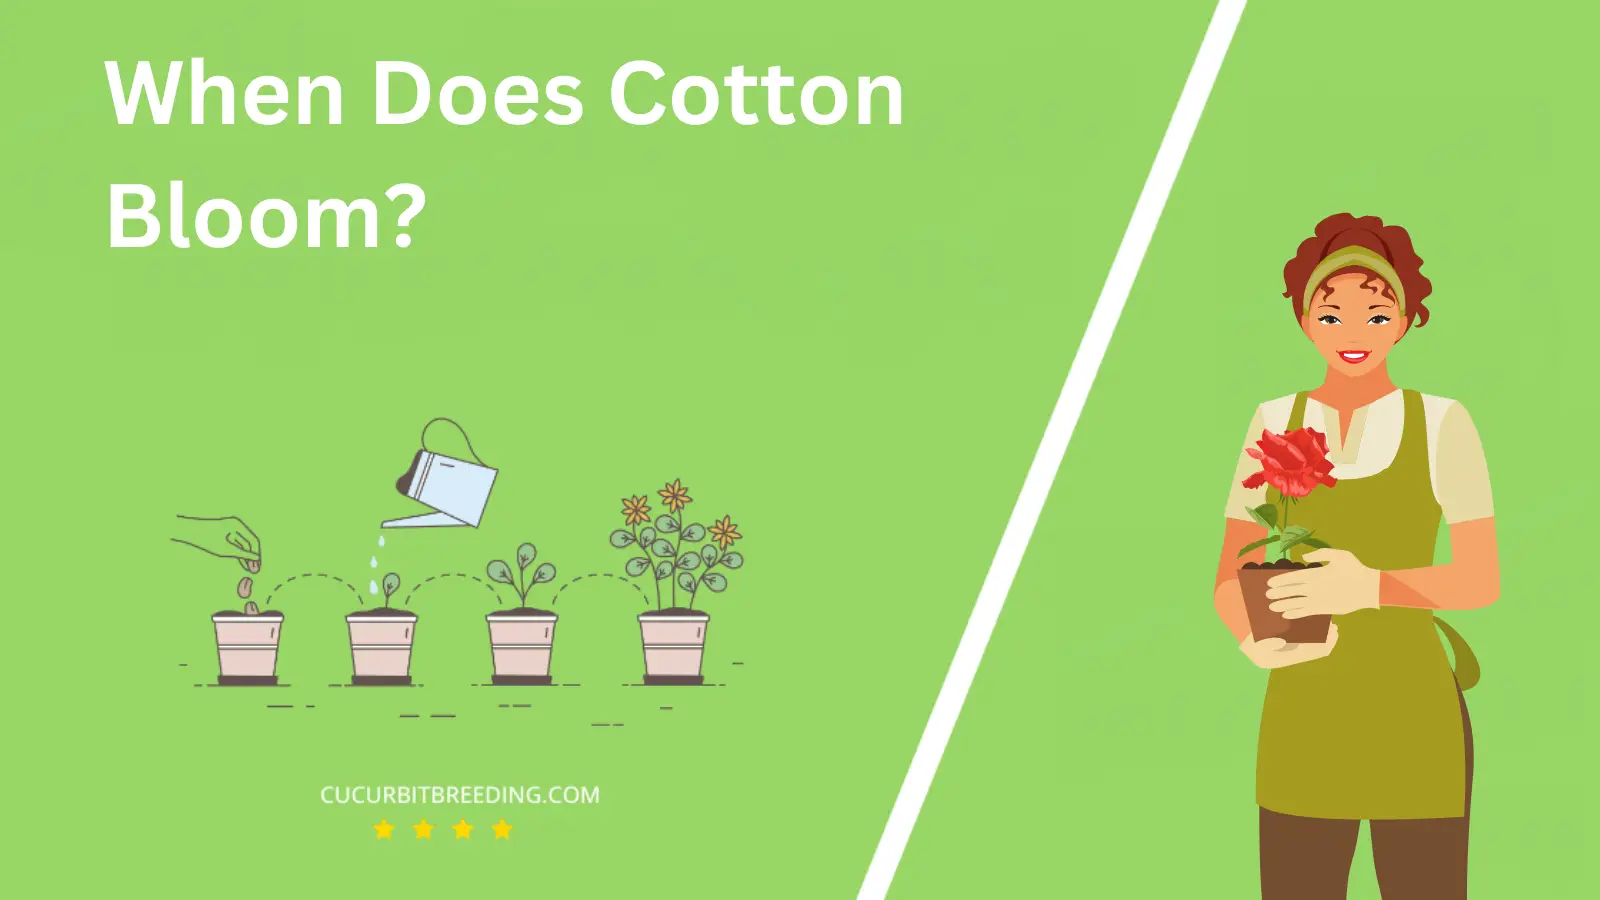 When Does Cotton Bloom?